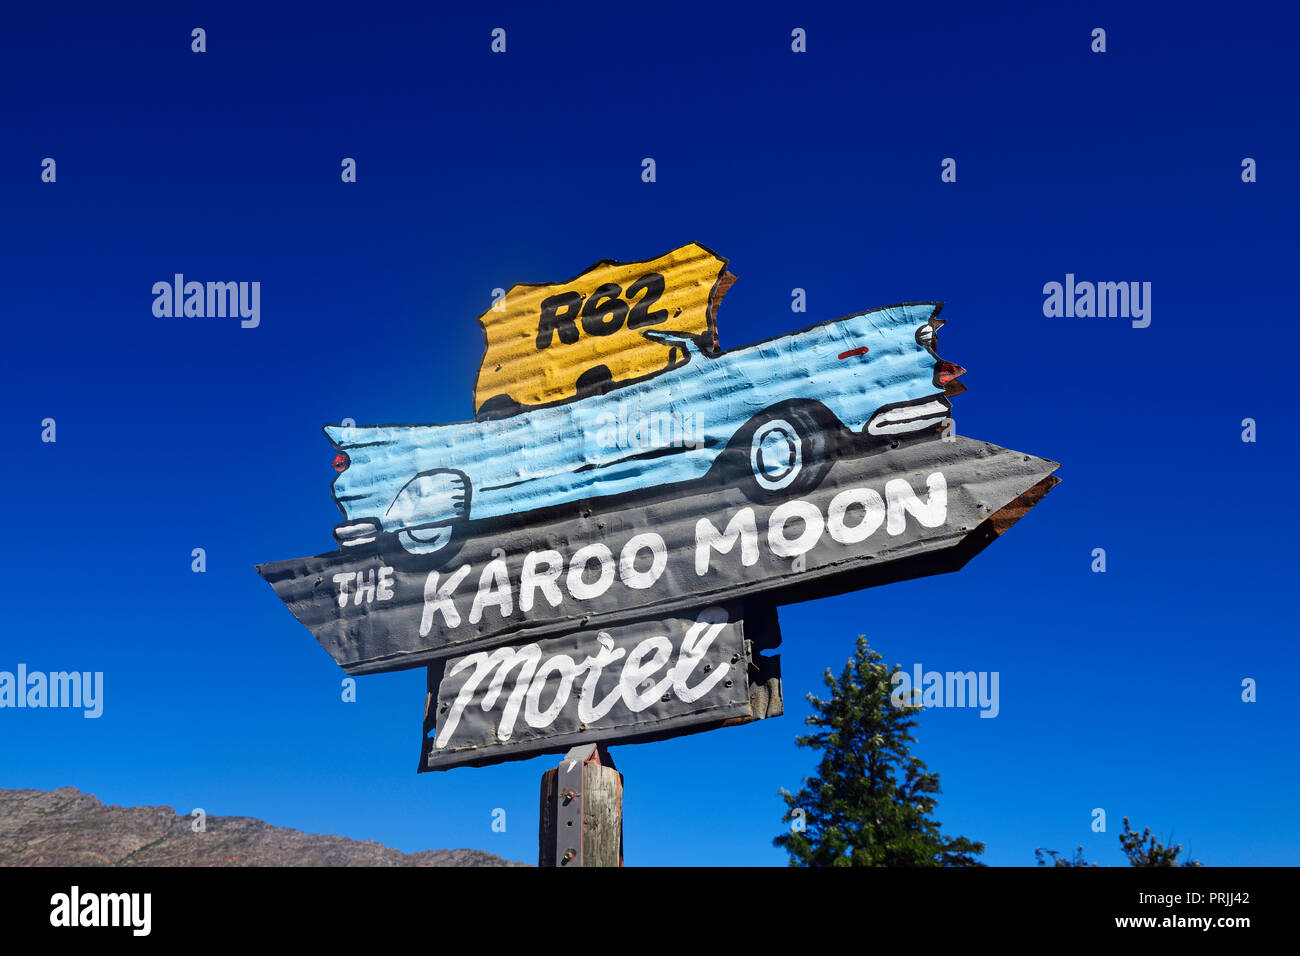 The Karoo Moon Hotel, sign, Route 62, Barrydale, South Africa Stock Photo